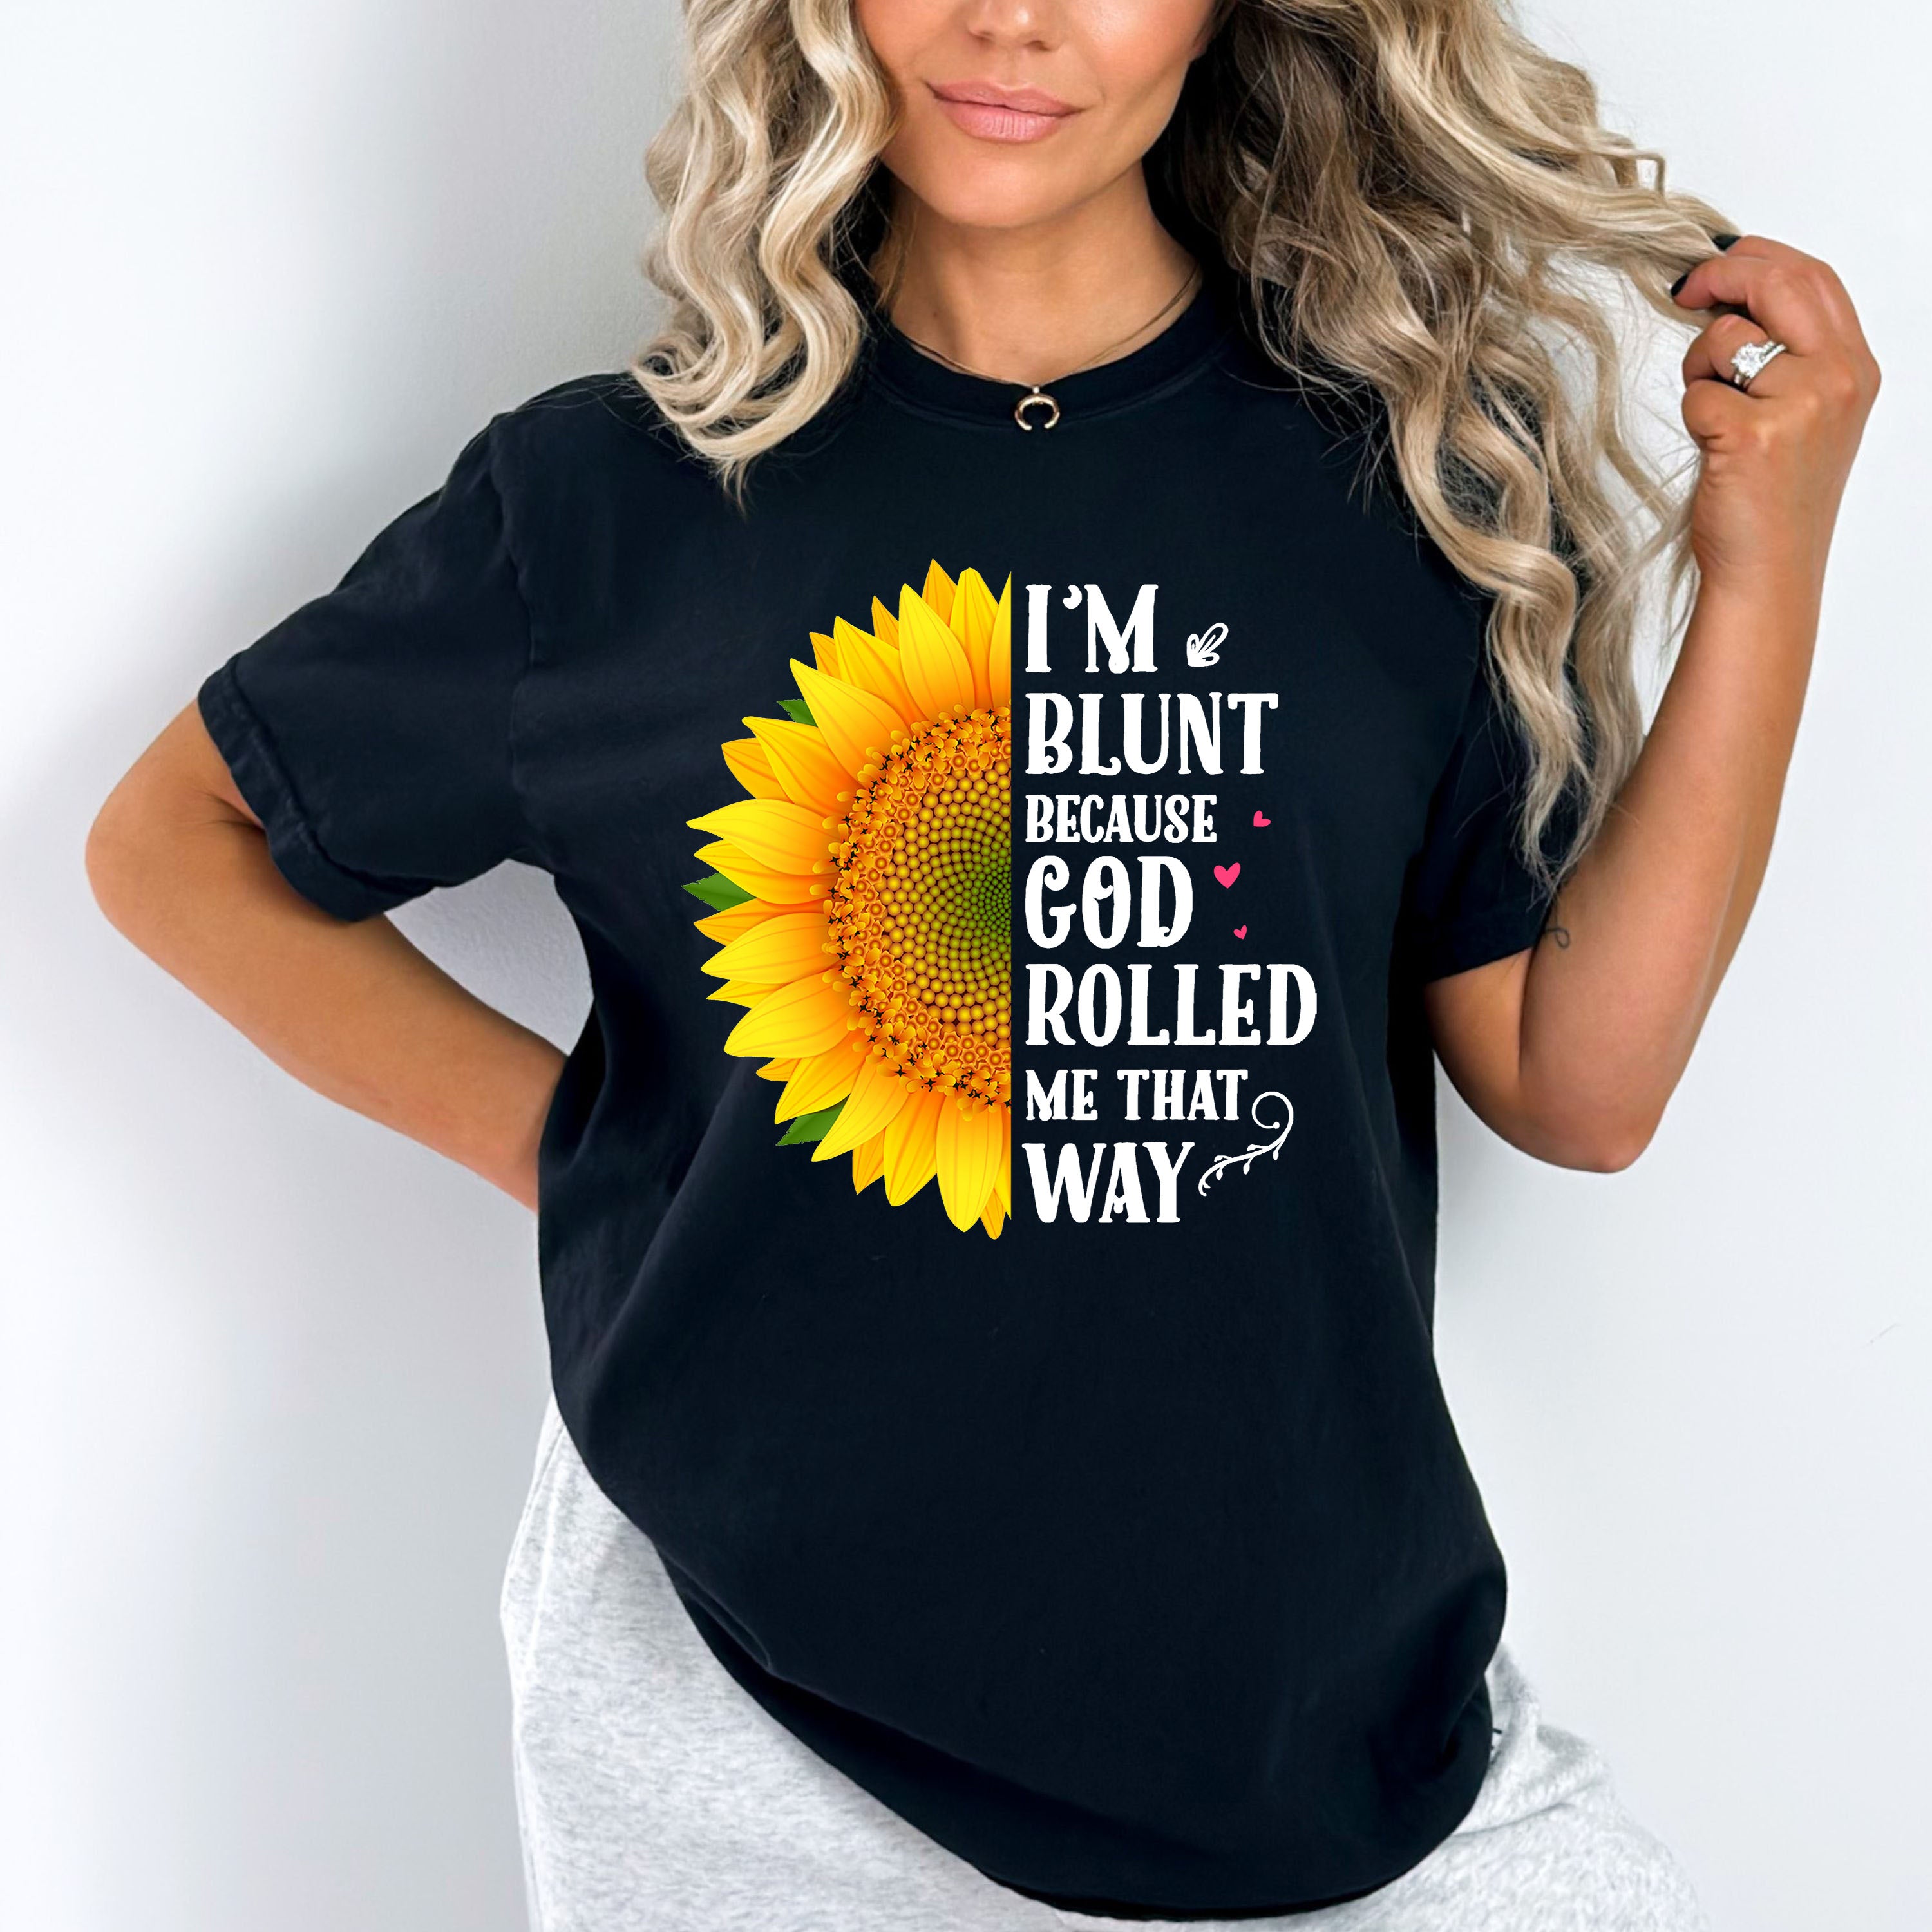 "I'M BLUNT BECAUSE GOD ROLLED ME THAT WAY''UNISEX FIT TEE